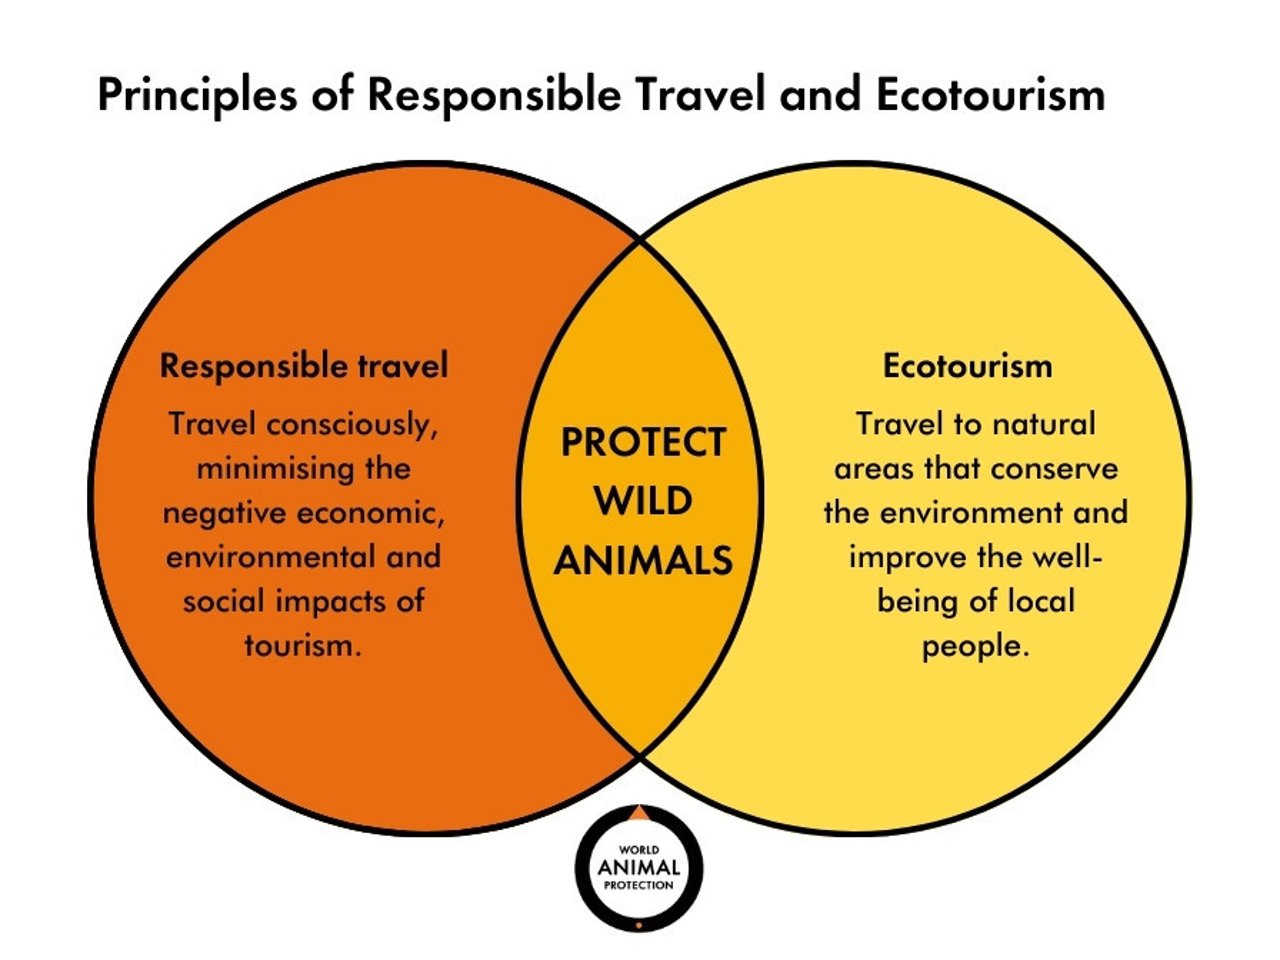 Responsible Travel: Travel consciously, minimising the negative economic, environmental and social impacts of tourism. Ecotourism:Travel to natural areas that conserve the environment and improve the well-being of local people. Both: Protect wild animals